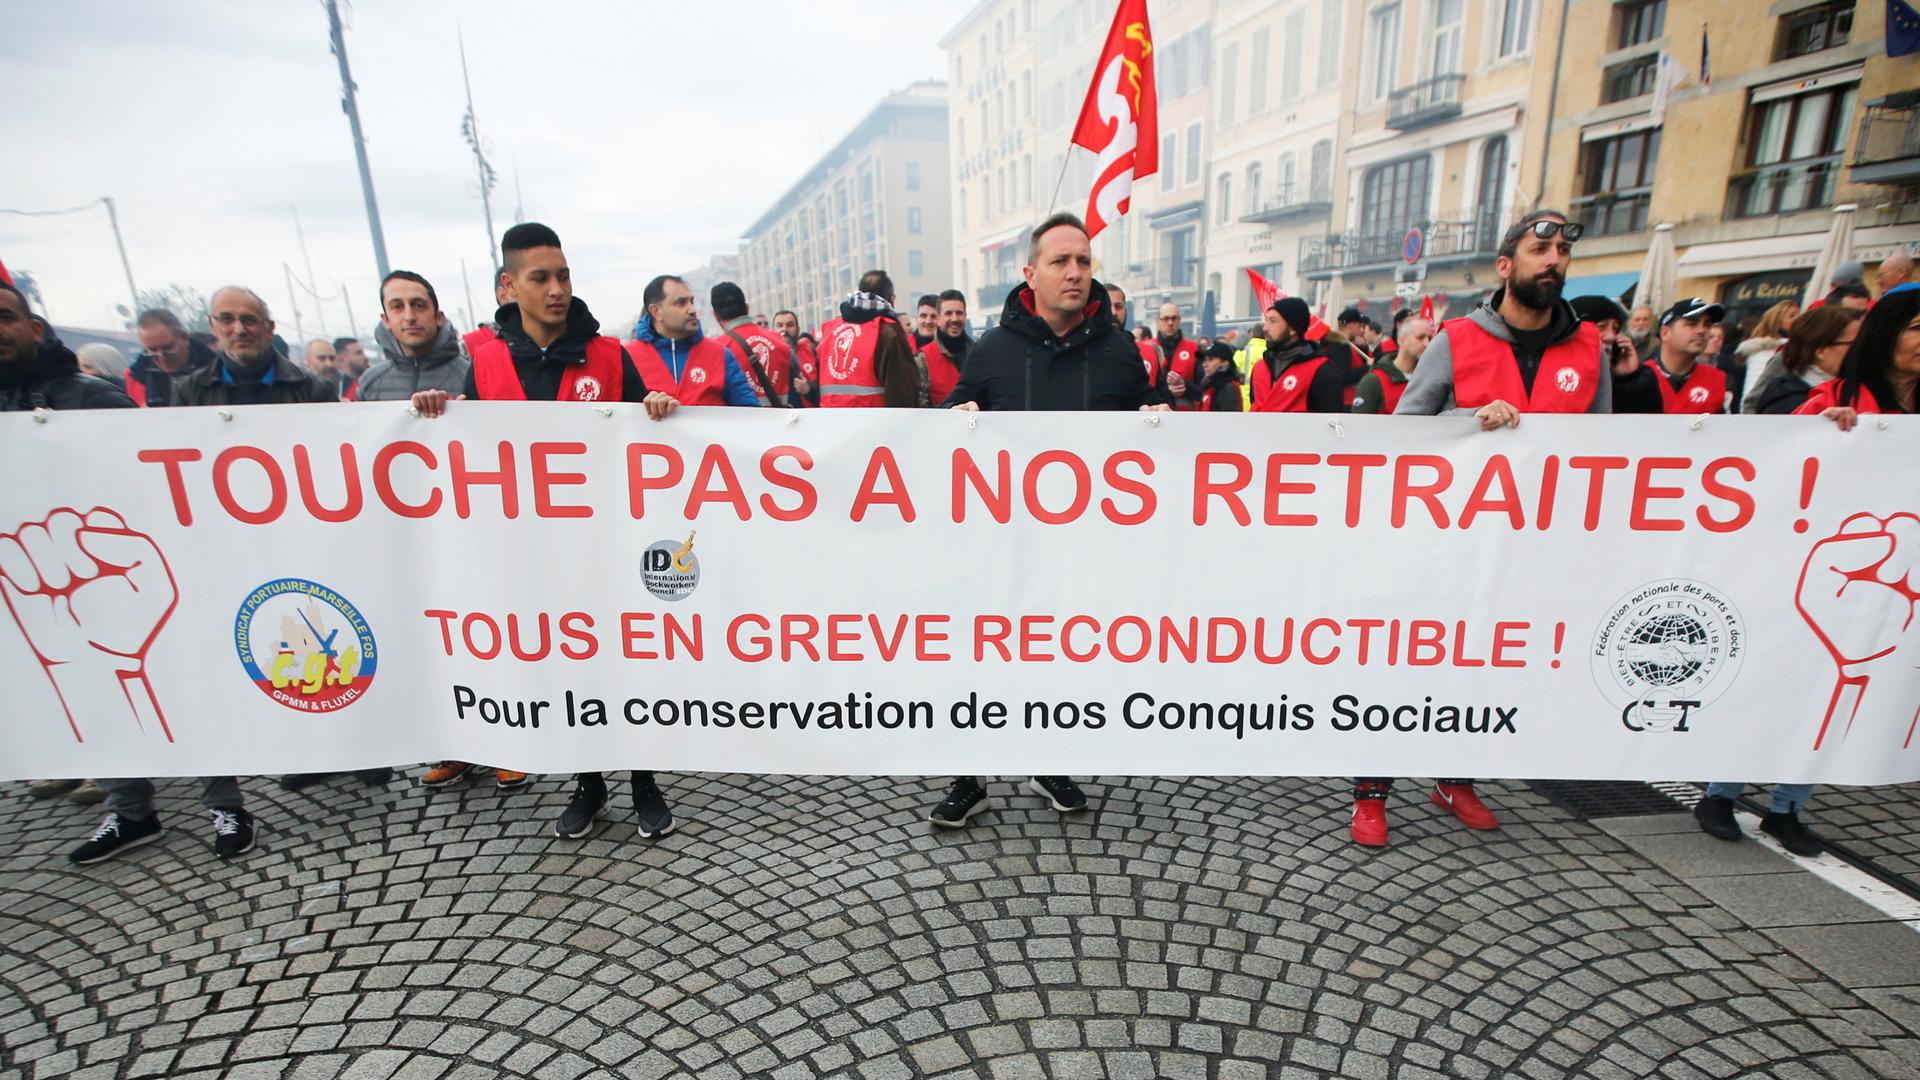 A large group of protesters are shown in the street holding a banner during a demonstration in Marseille. The banner reads, 